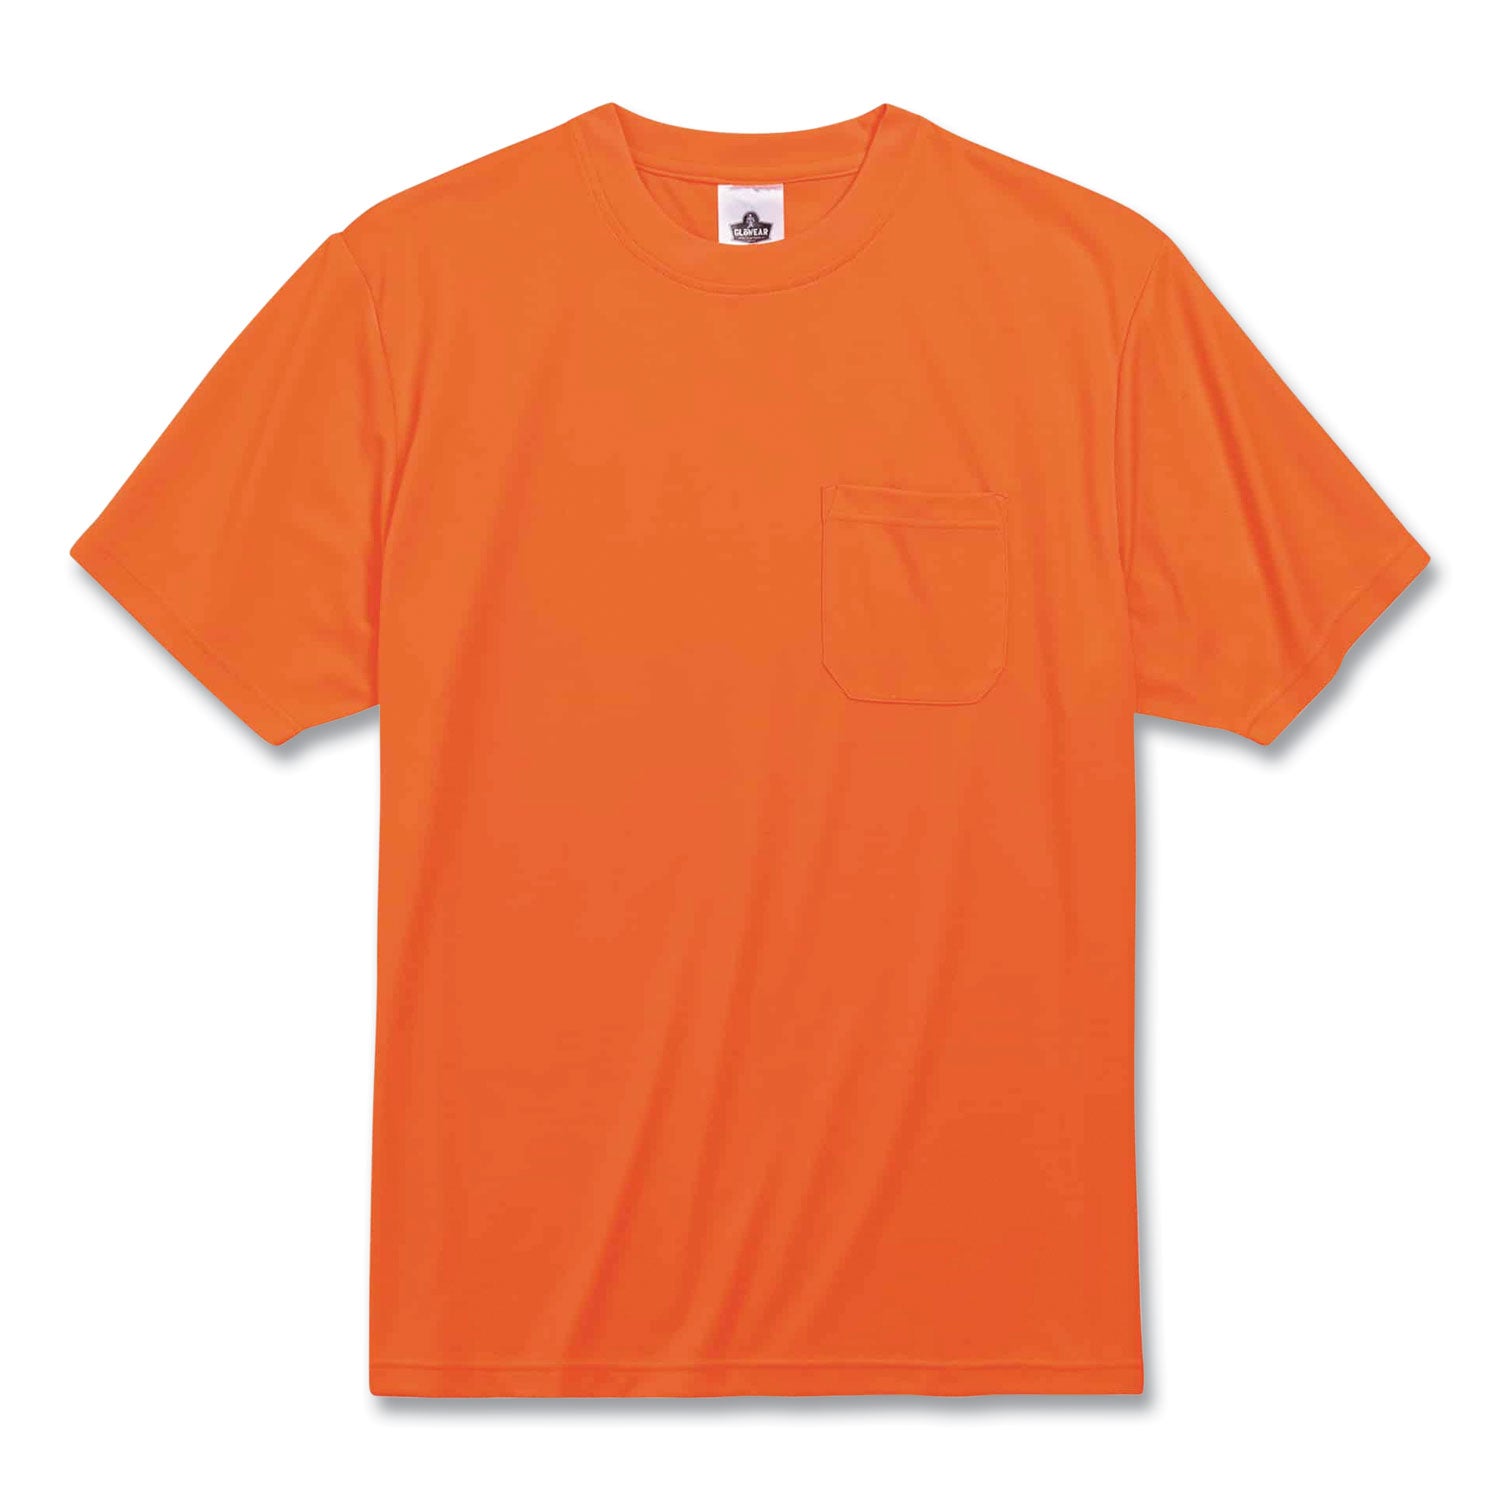 glowear-8089-non-certified-hi-vis-t-shirt-polyester-small-orange-ships-in-1-3-business-days_ego21562 - 1